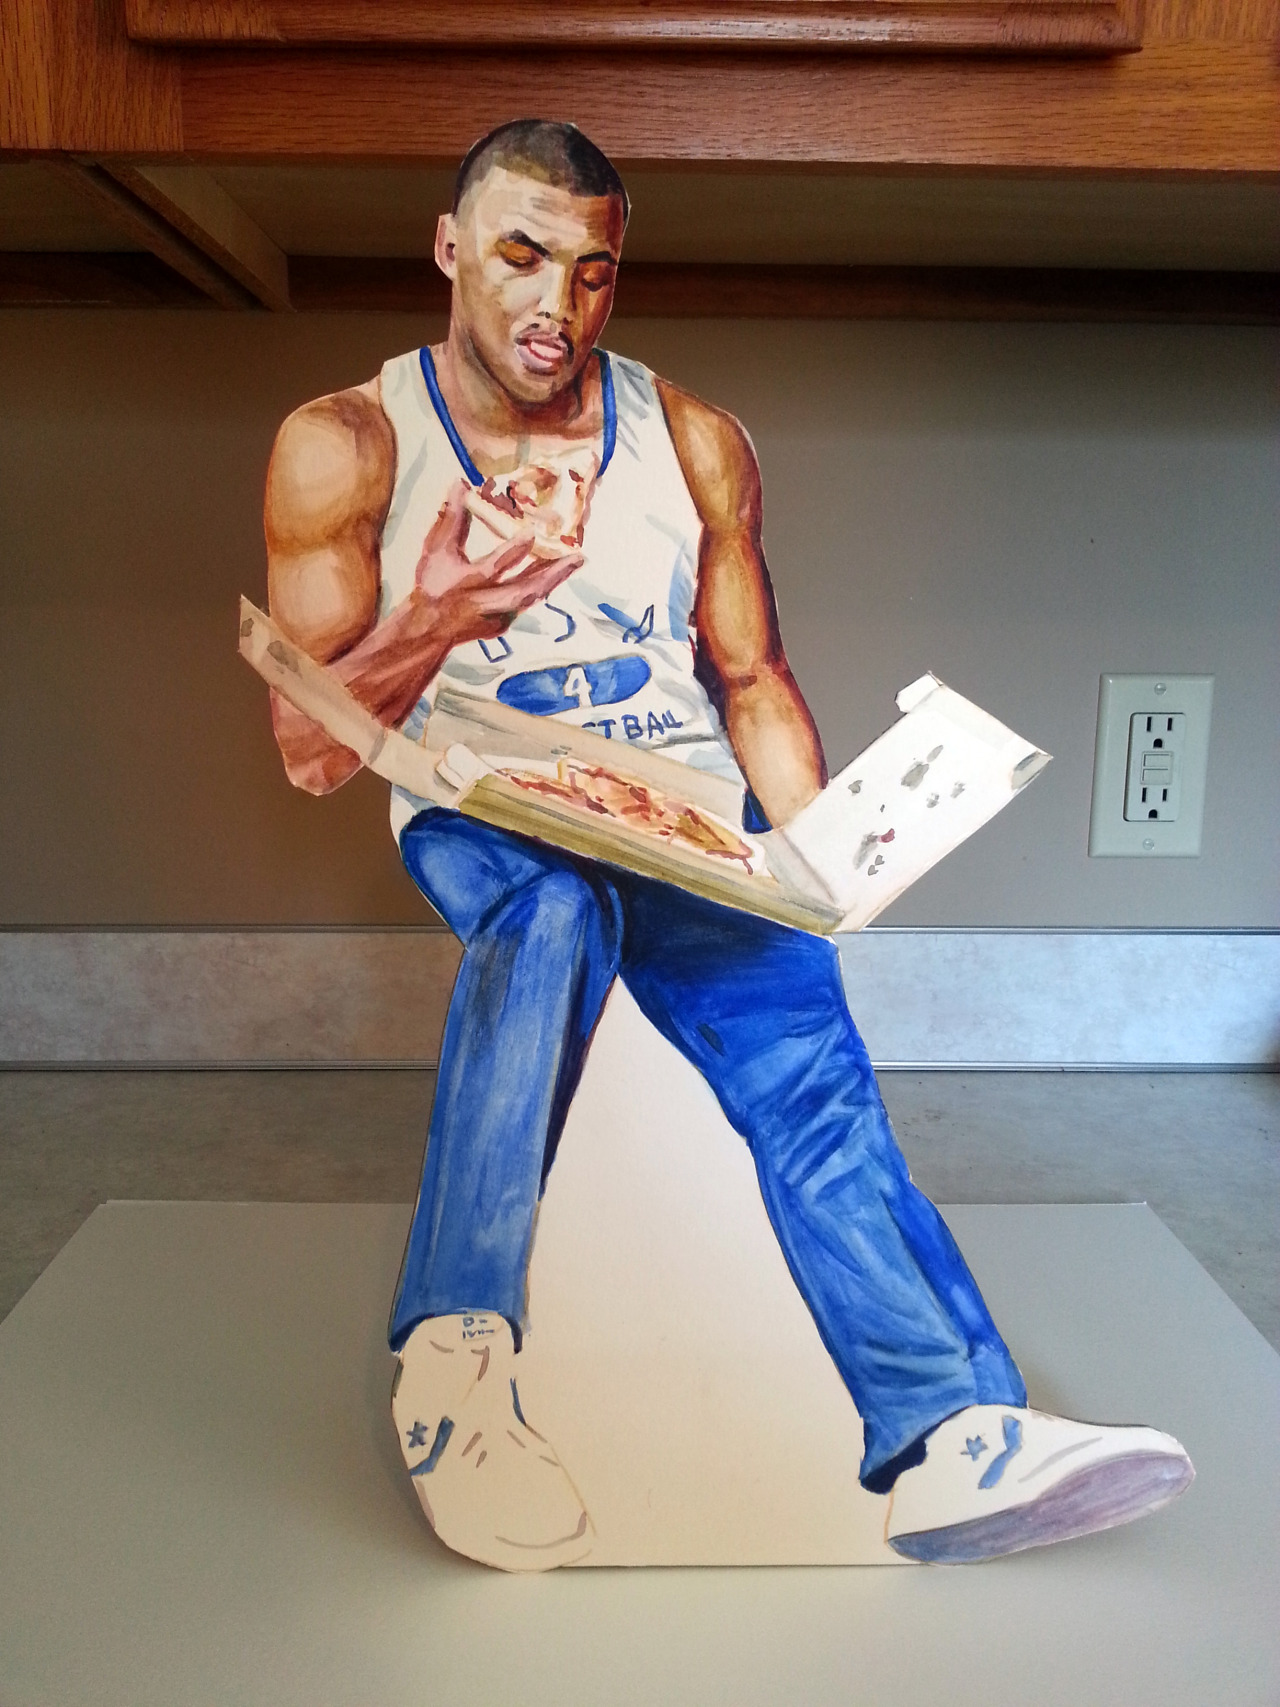 Hand-painted cardboard cutout of Charles Barkley eating a pizza.